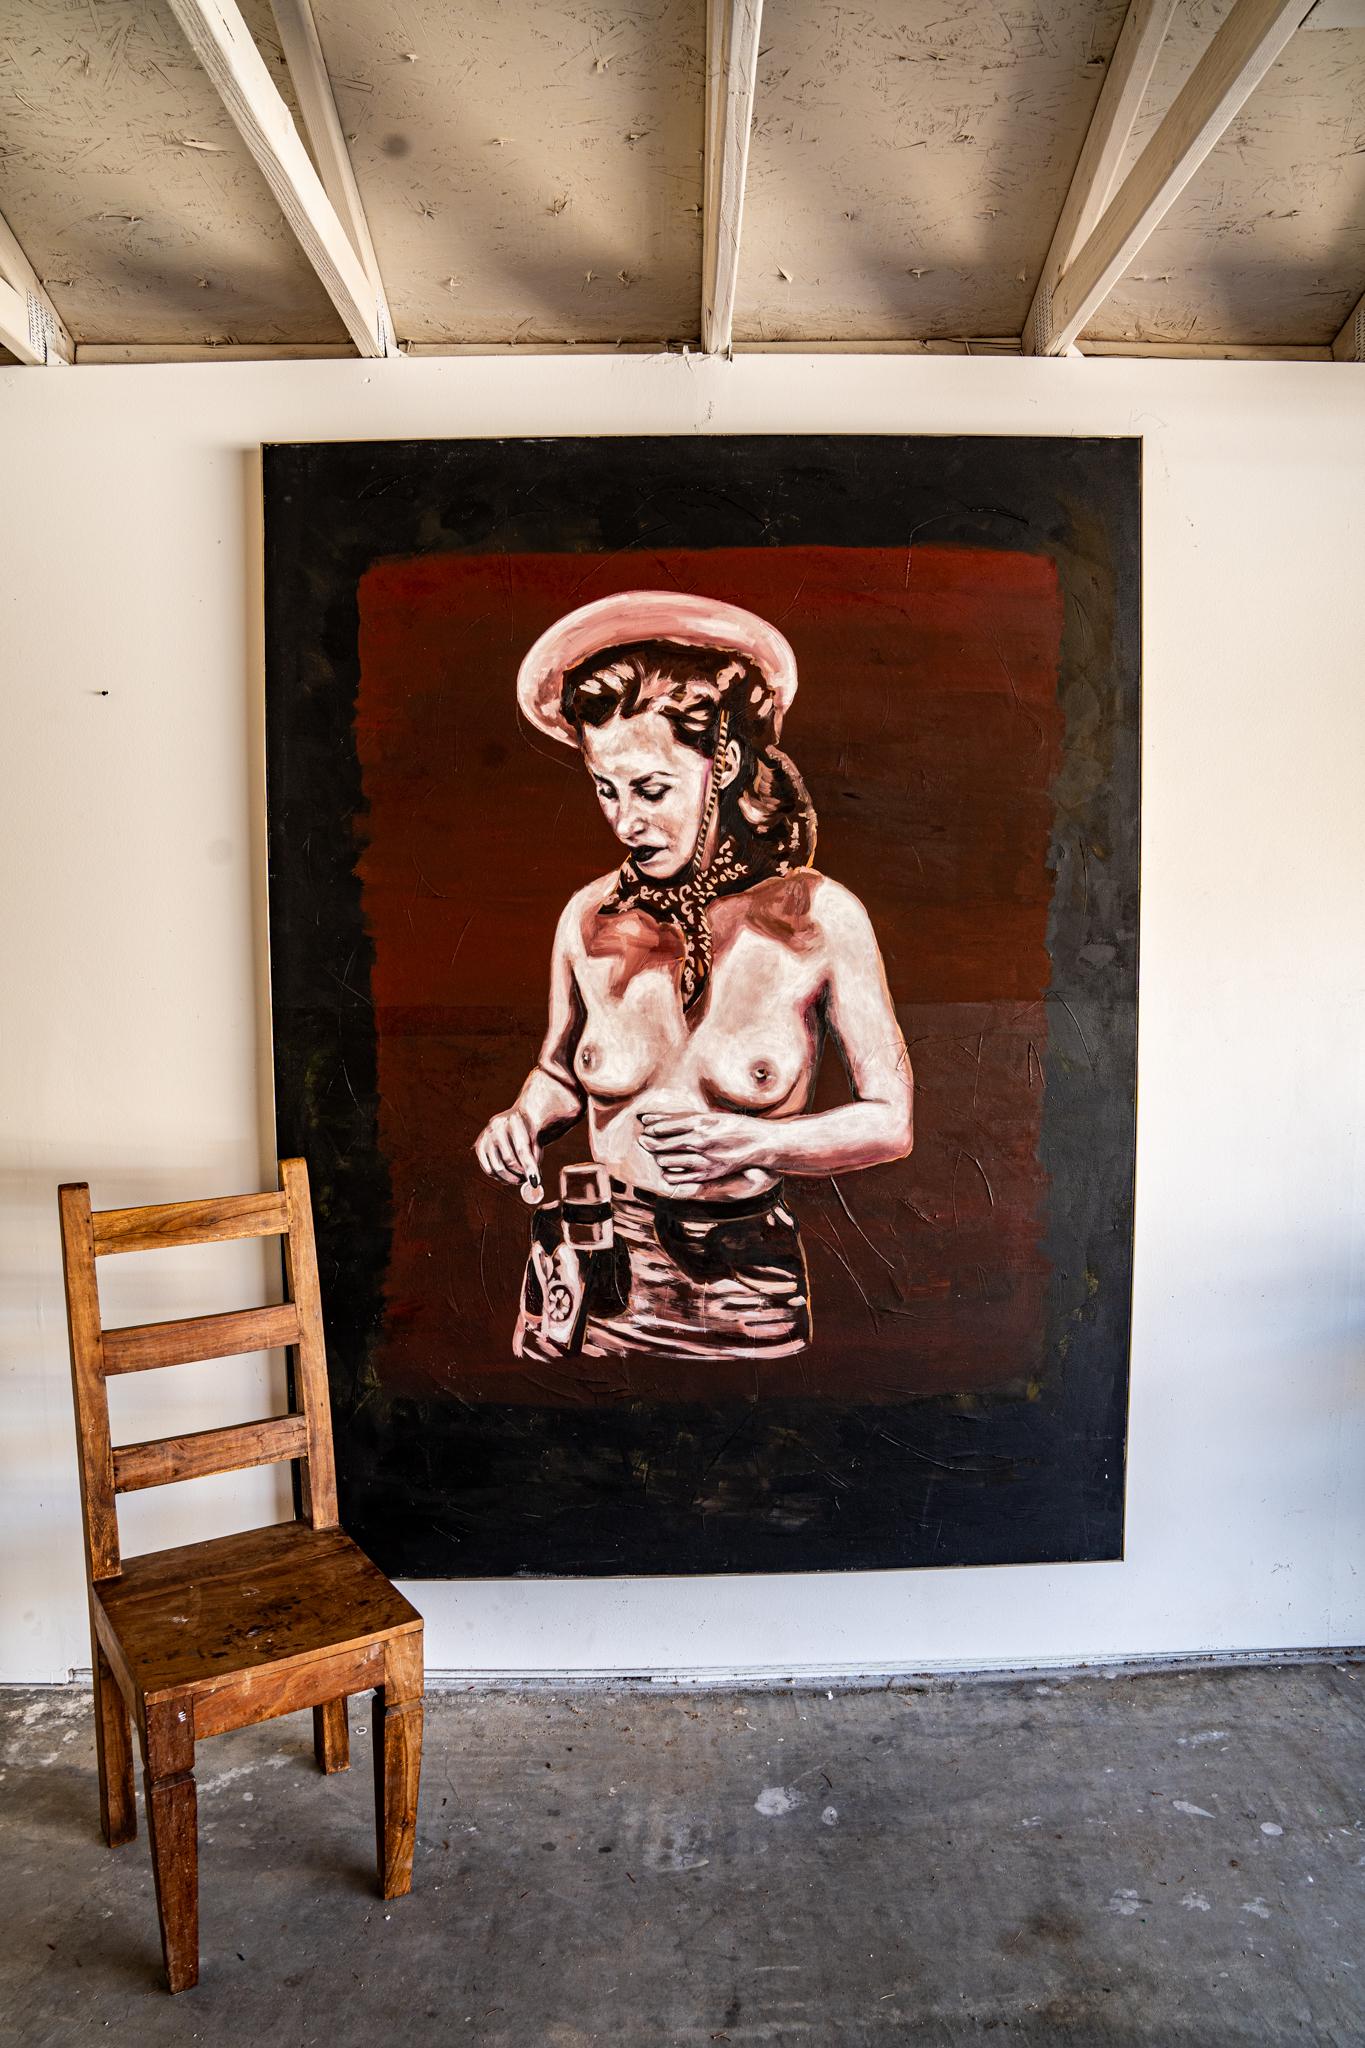 <p>Artist Comments<br>Artist Matson Ambroise creates art that exists as two things at once, fiercely modern yet discerningly timeless. In this particular piece, Matson depicts a bold and intriguing portrait of a cowgirl set against a dark red